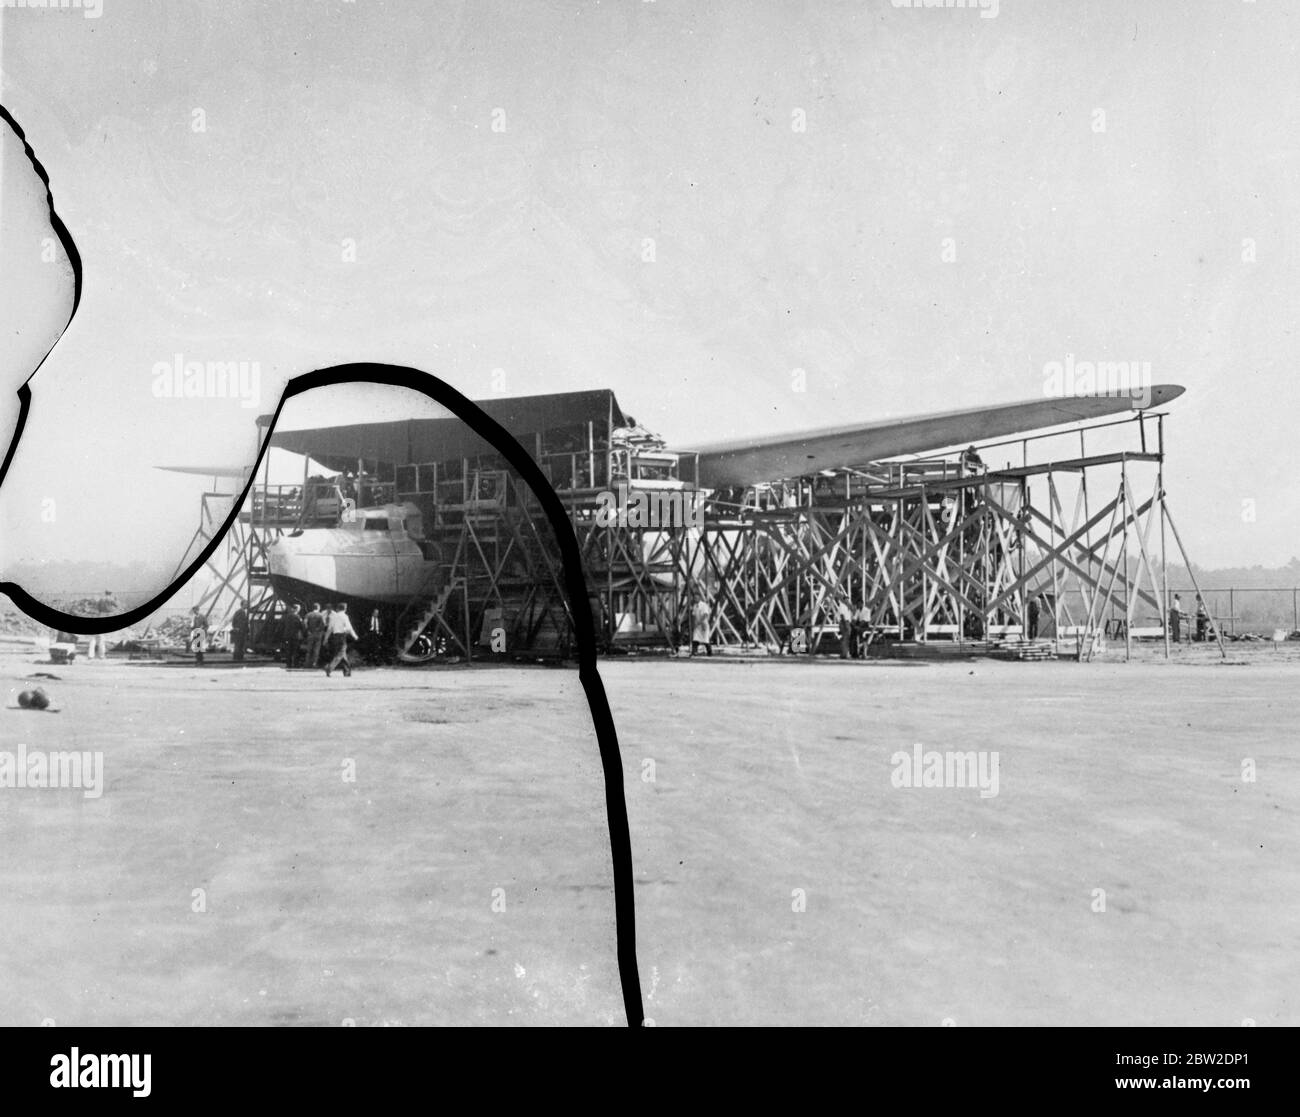 A huge Martin Clipper flying boat its 157 feet wing supported by trestles, under construction at the Martin works in Baltimore, Maryland for service in the Black Sea. The plane is 90 feet long and will have room for 26 people and a crew of seven powered by four 1000 hp engines the machine has a fuel capacity of 4000 gallons and cruising speed of 190 miles an hour it could make a transatlantic flight with ease. 10 October 1937. Stock Photo